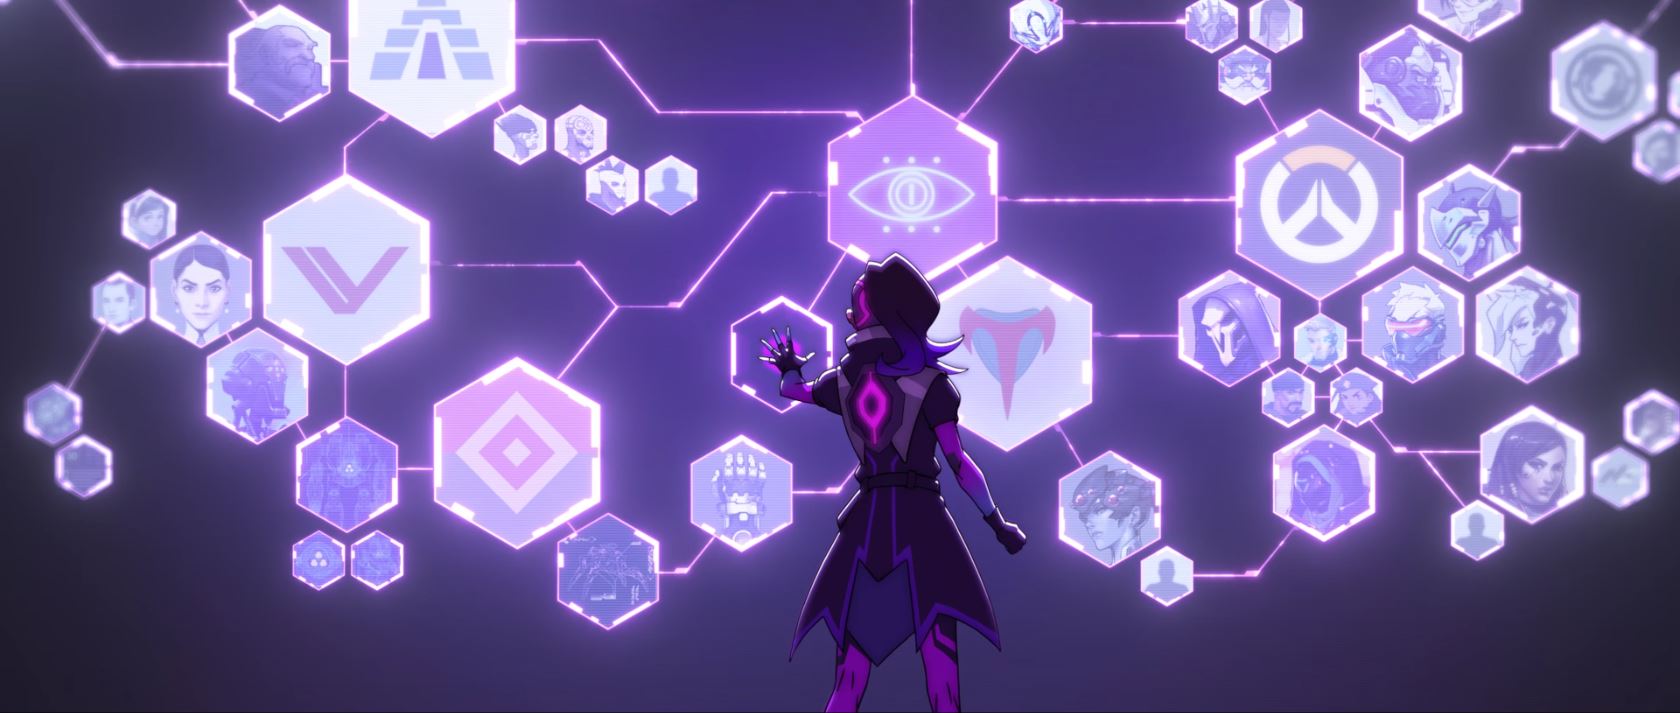 Sombra's Conspiracy Wall